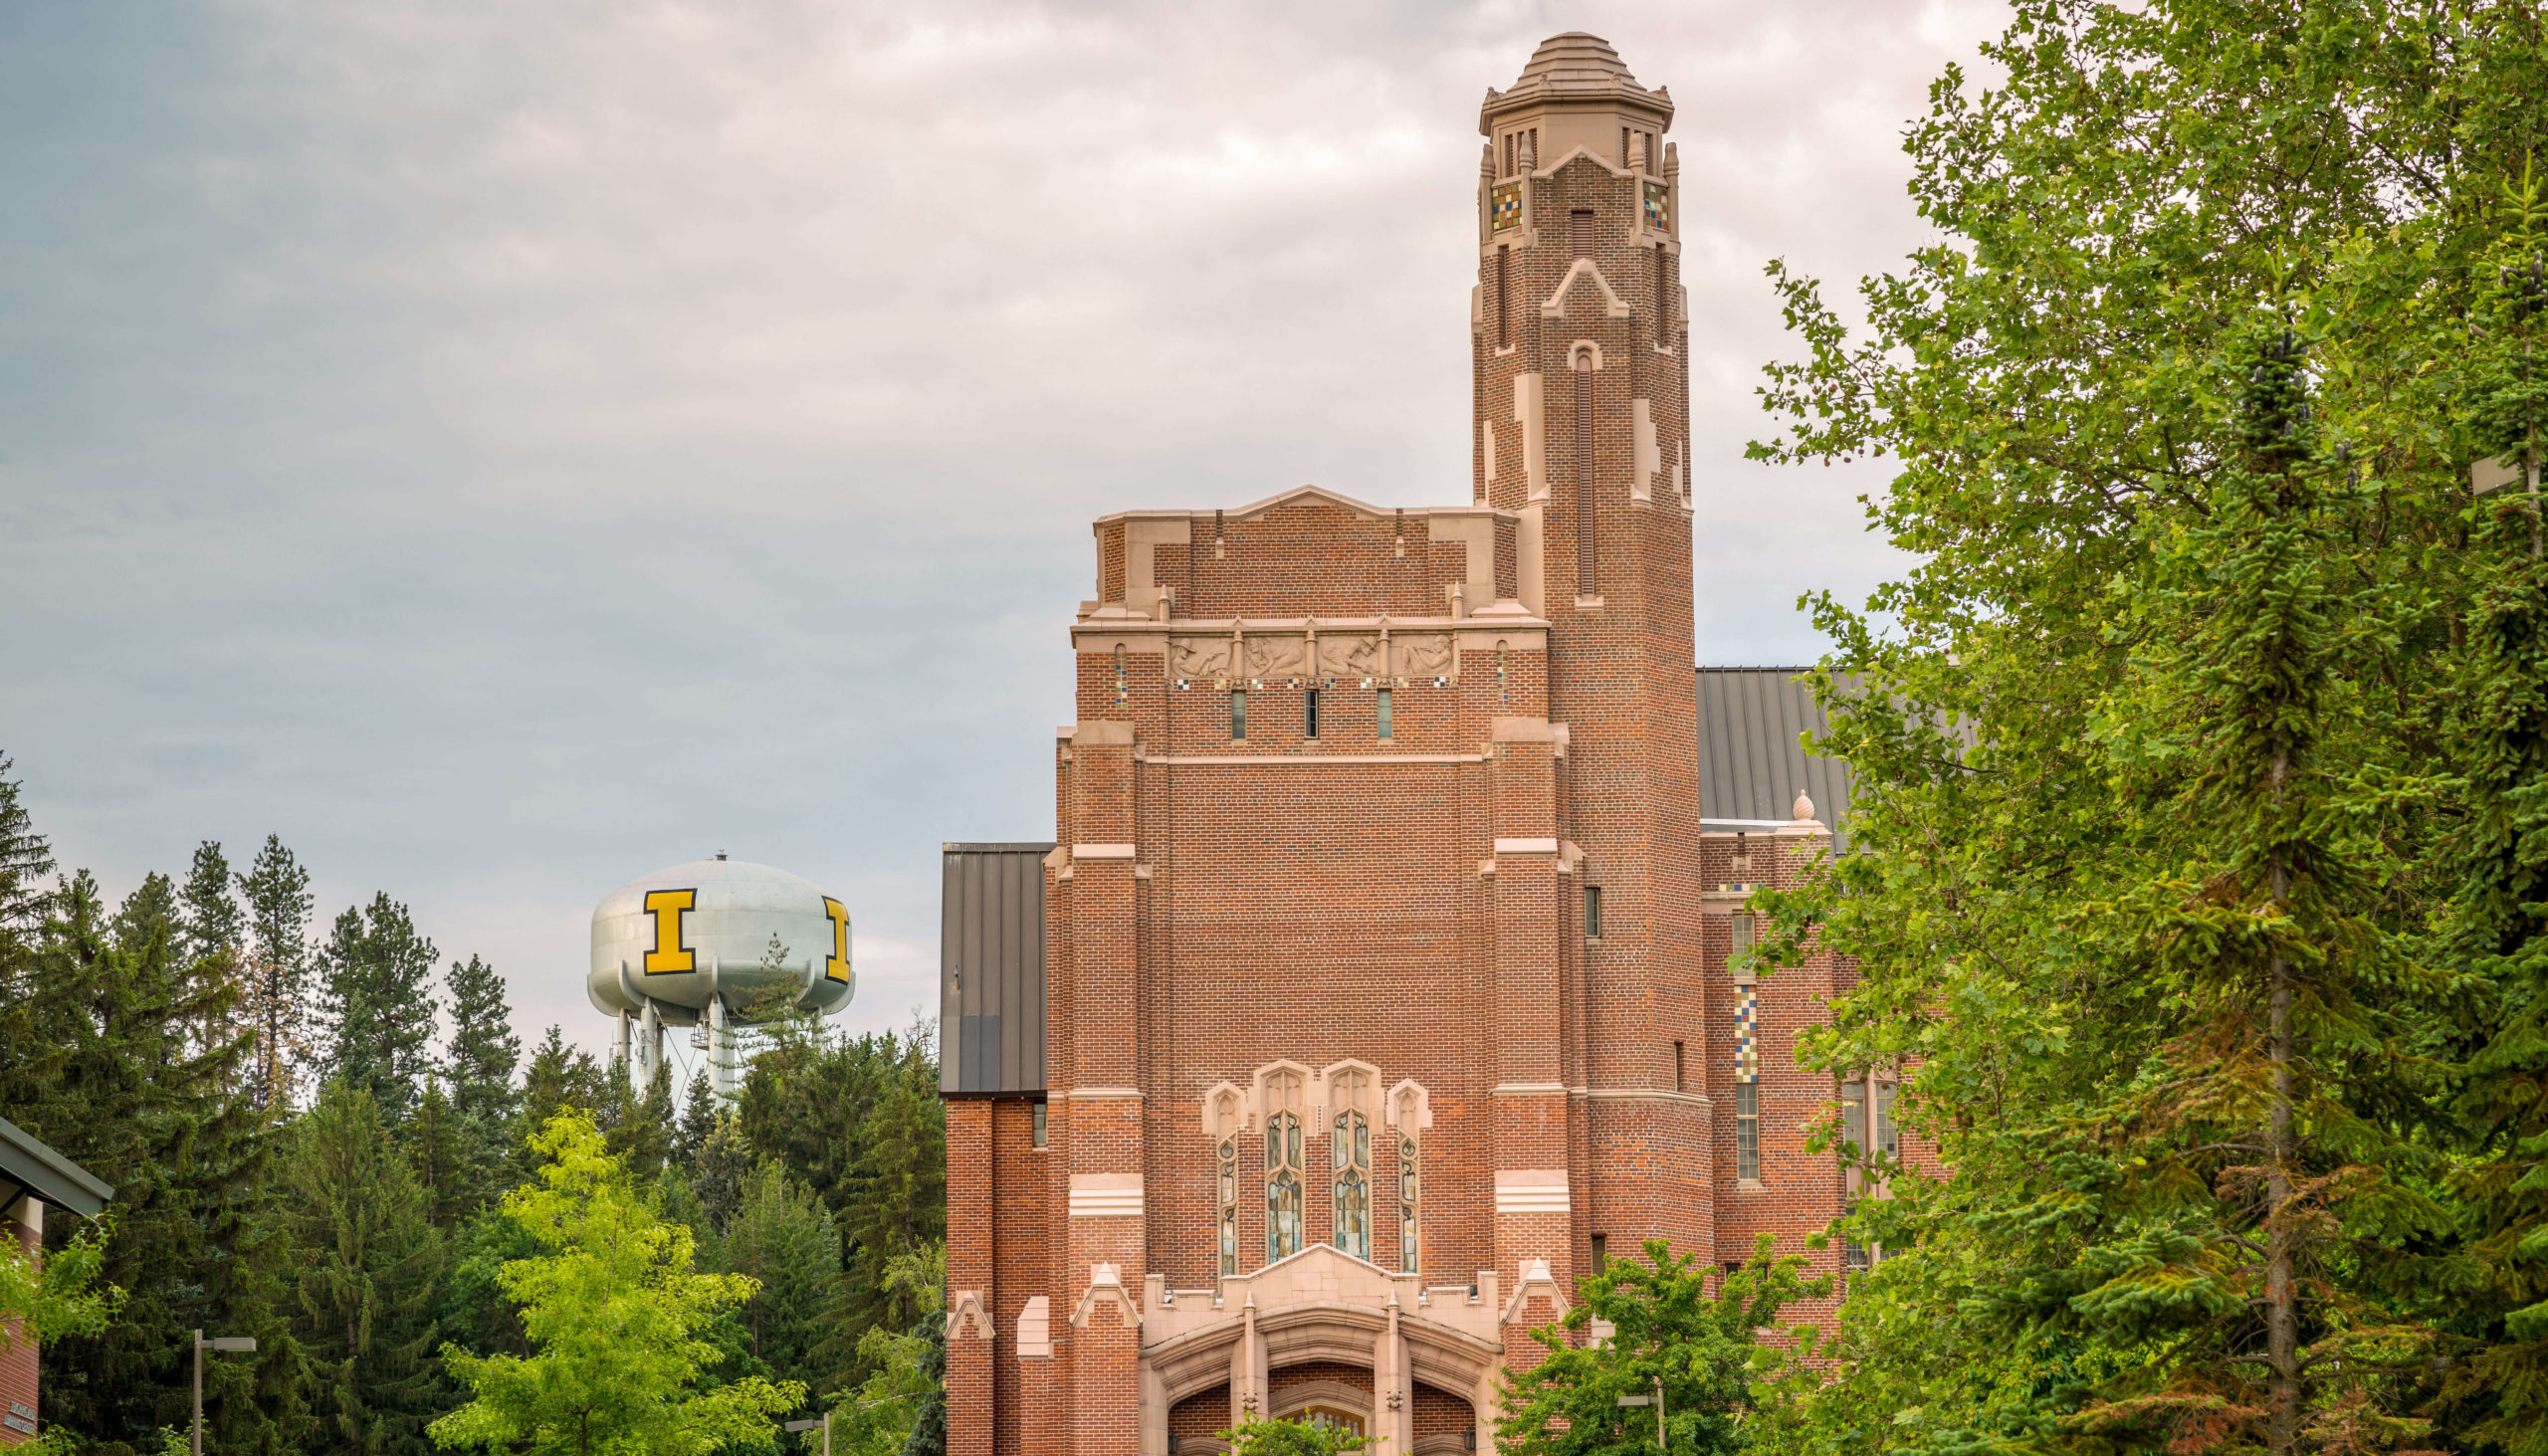 Memorial Gymnasium and the University of Idaho water tower are landmarks of the Moscow, Idaho college campus.